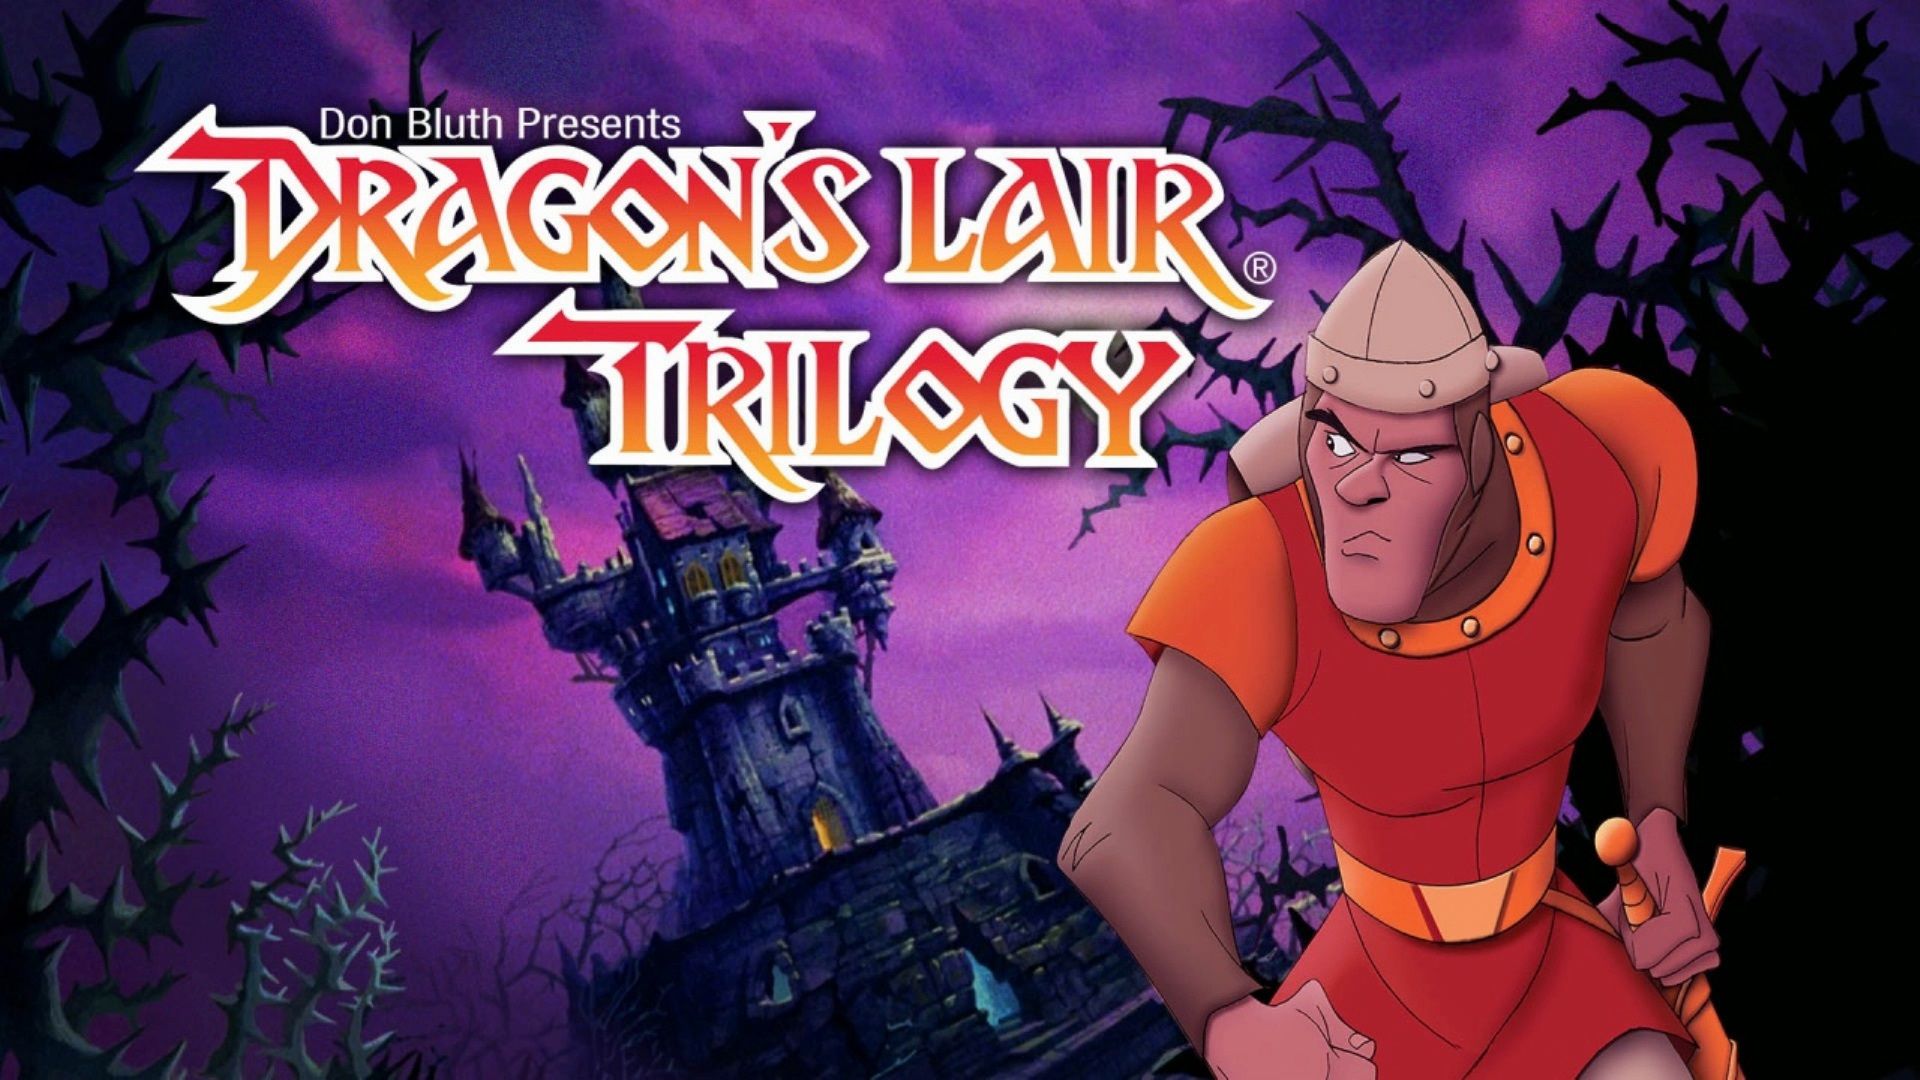 Dragon's Lair Trilogy coming to Switch, out next week